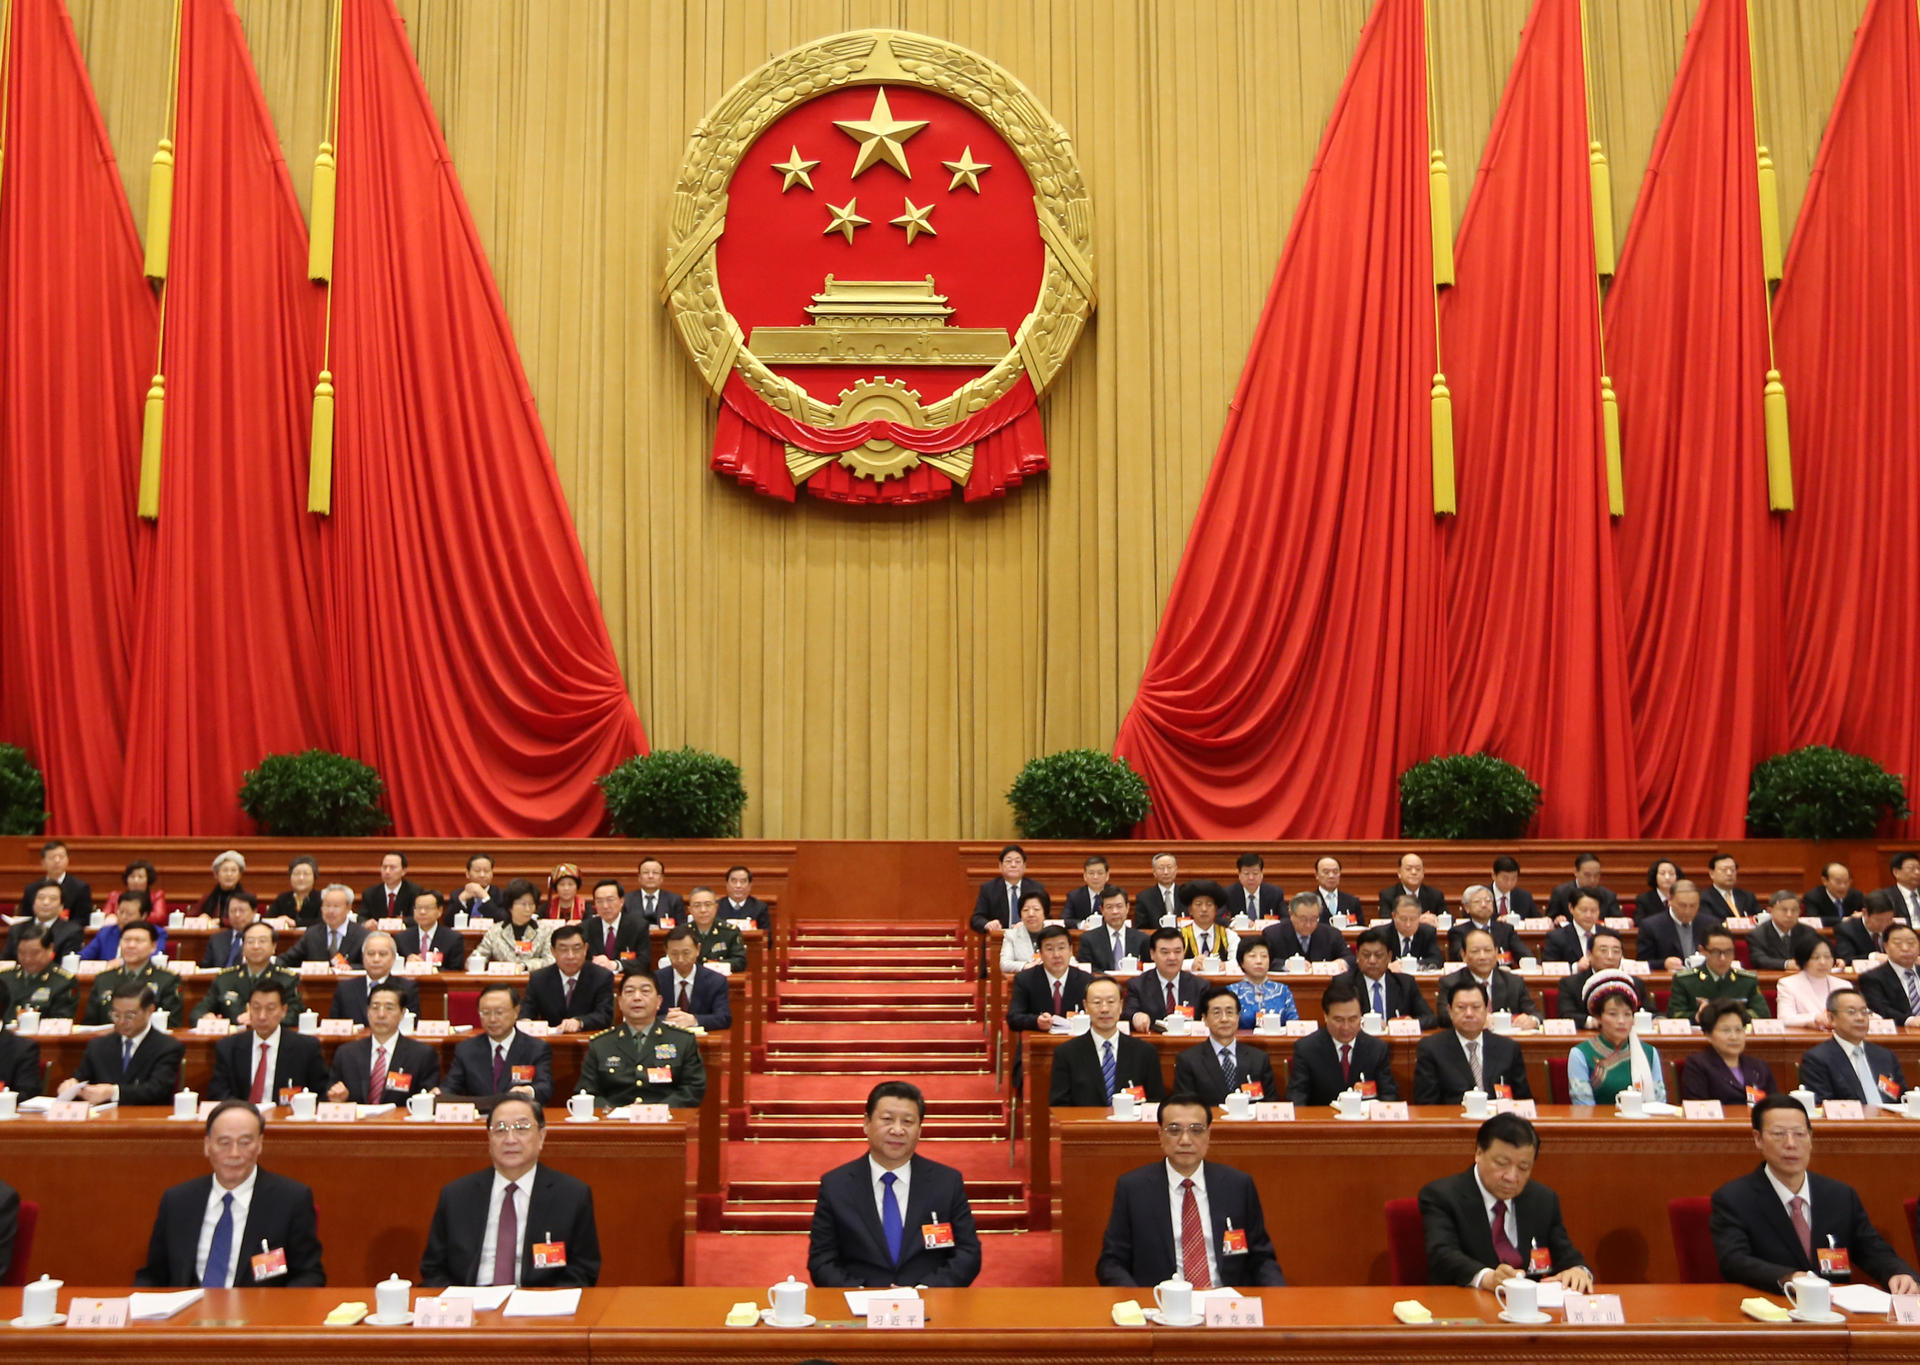 President Xi Jinping (centre) and Premier Li Keqiang (to his left) at the opening of the NPC. Photo: Xinhua